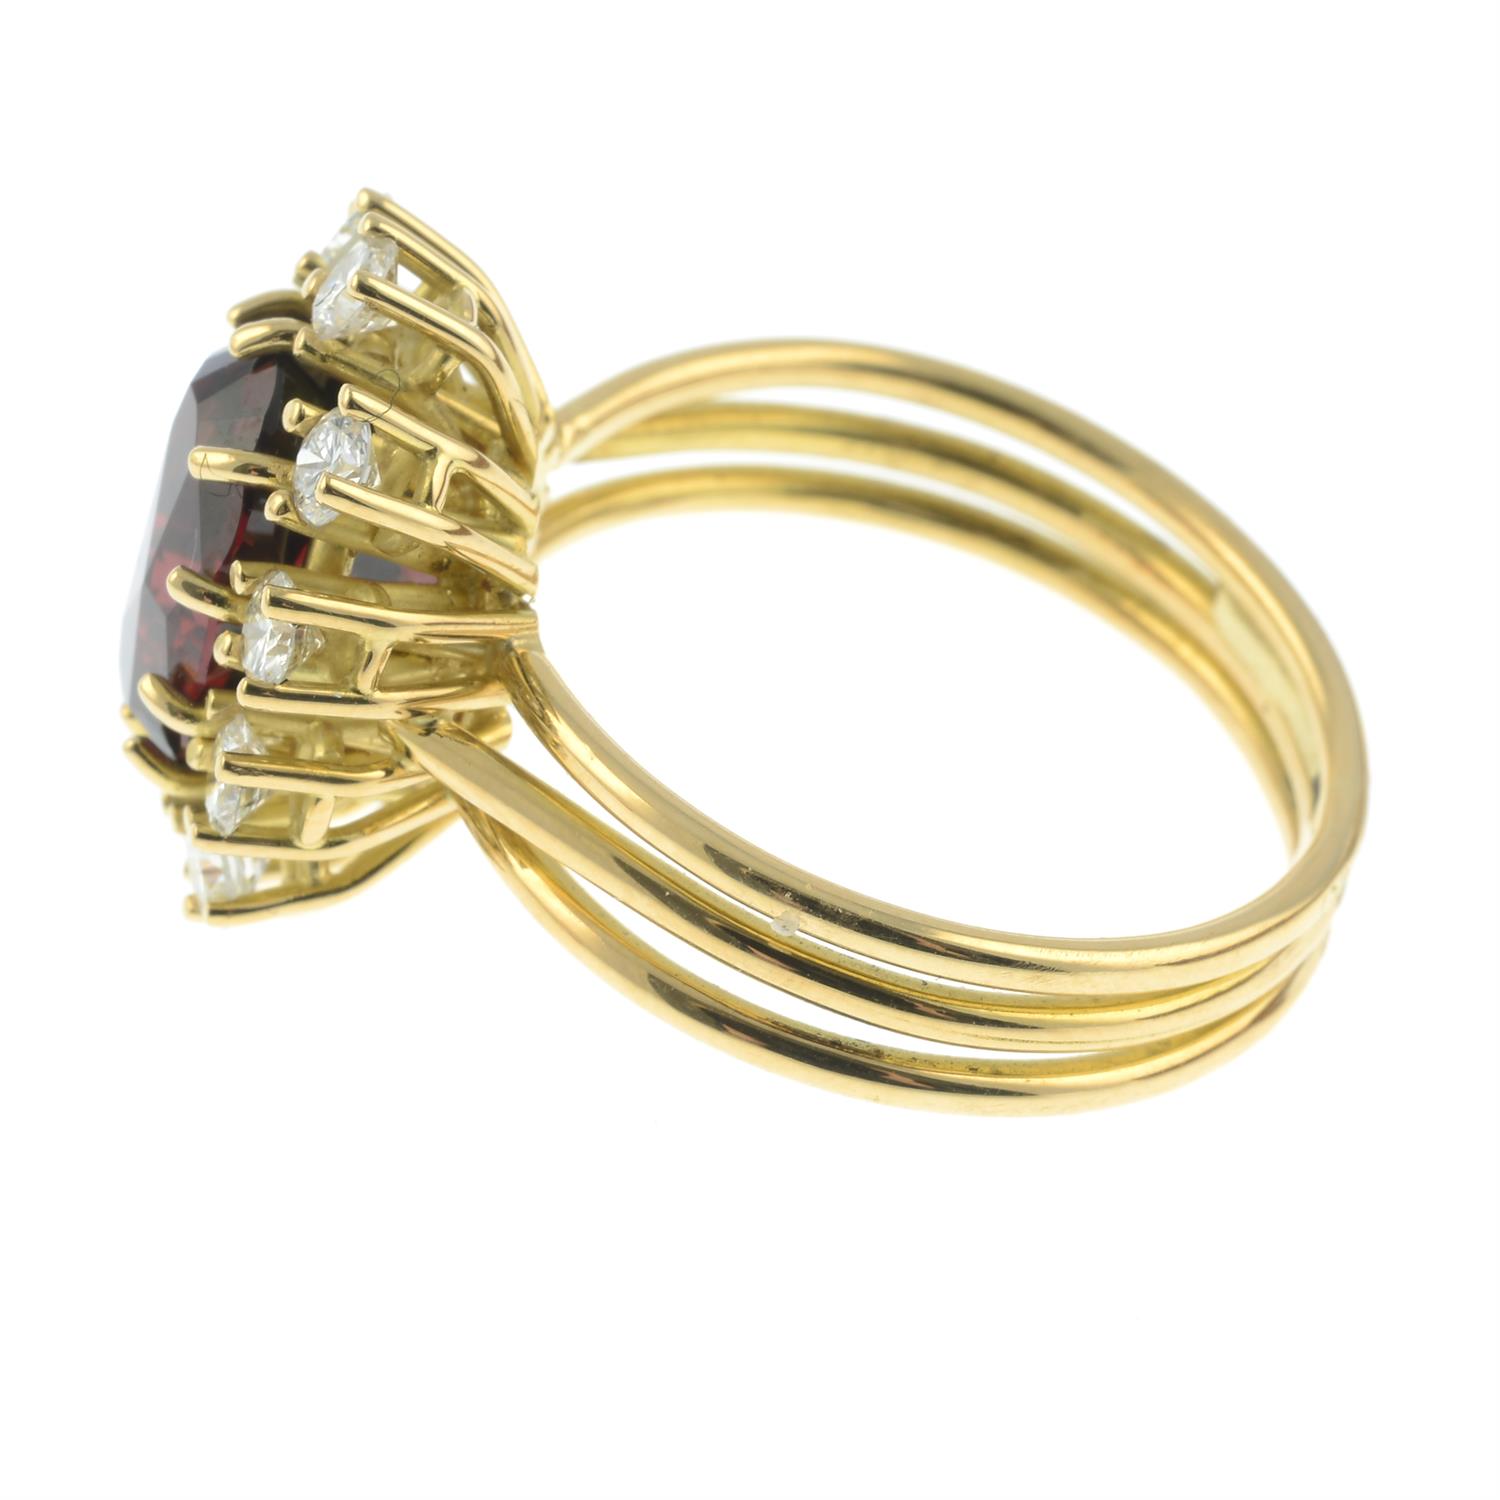 A garnet and brilliant-cut diamond cluster ring, attributed to Erwin Springbrunn. - Image 3 of 6